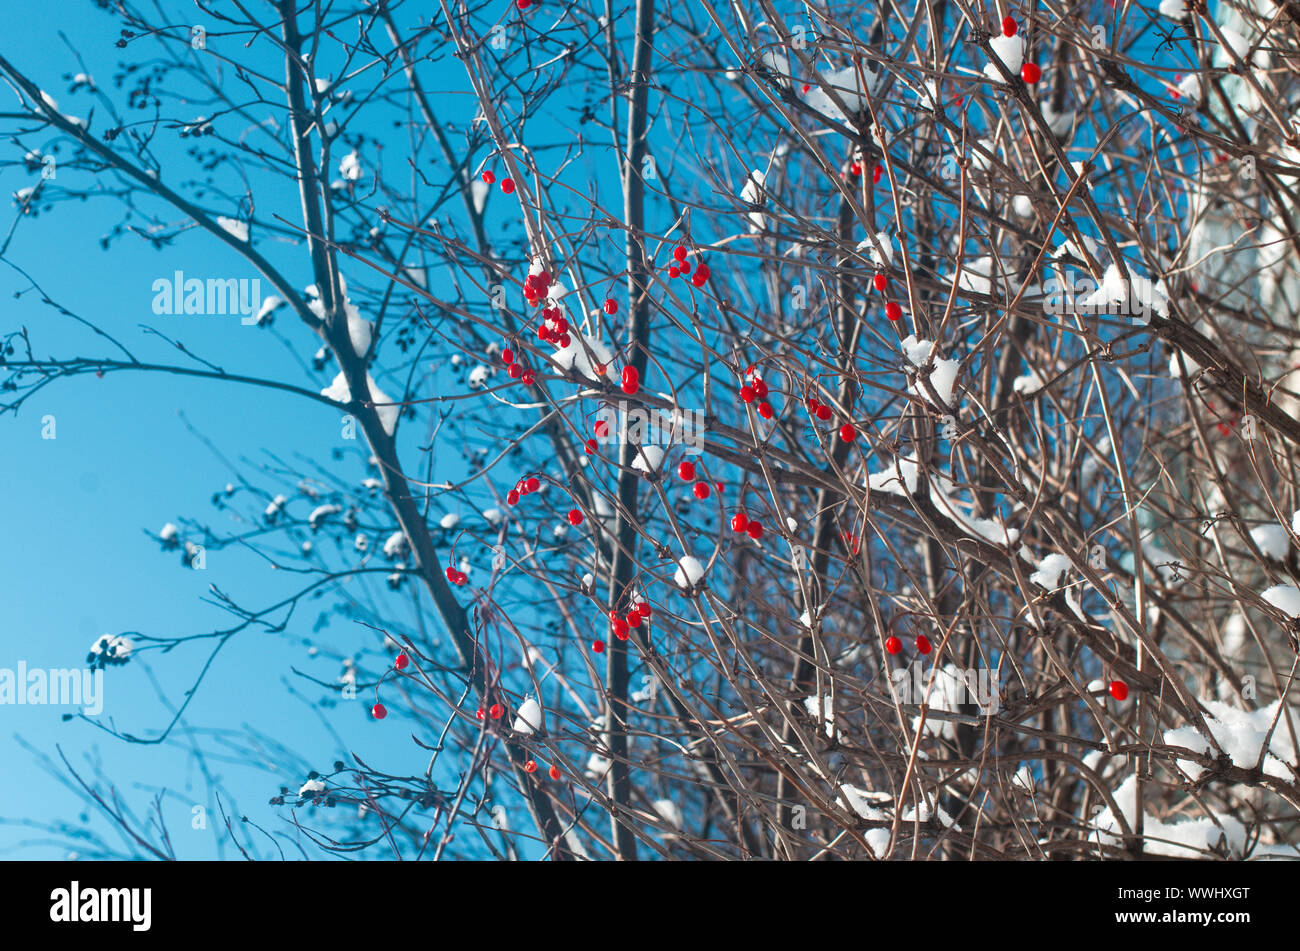 Bunches of red viburnum on dry branches covered with white snow Stock Photo